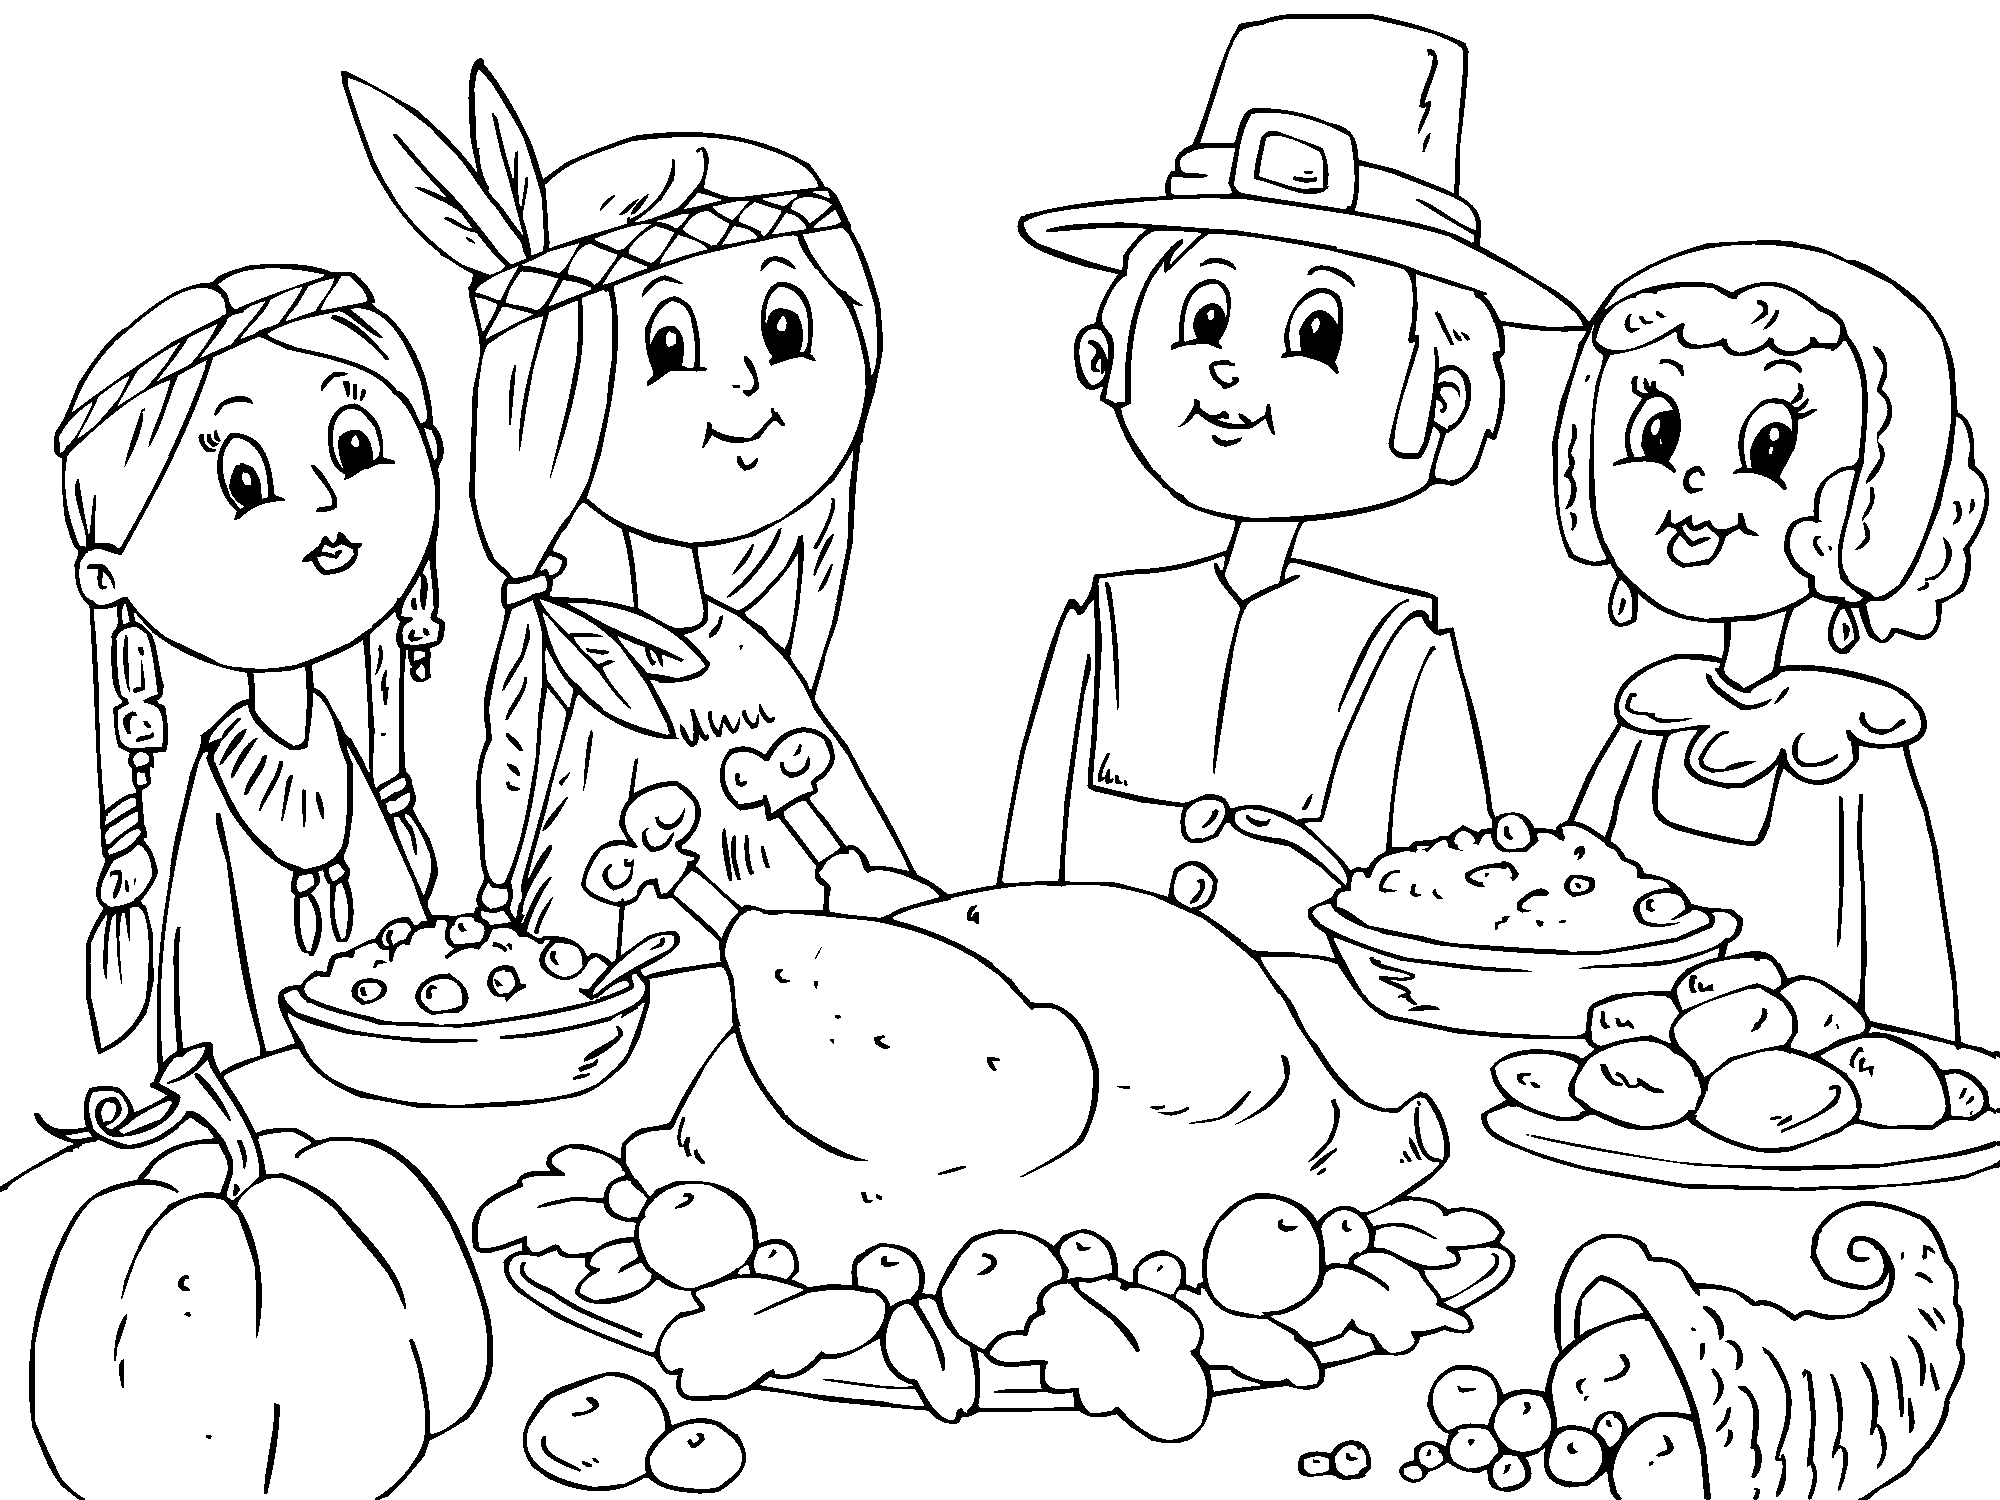 Thanksgiving day coloring pages Crafts and Worksheets